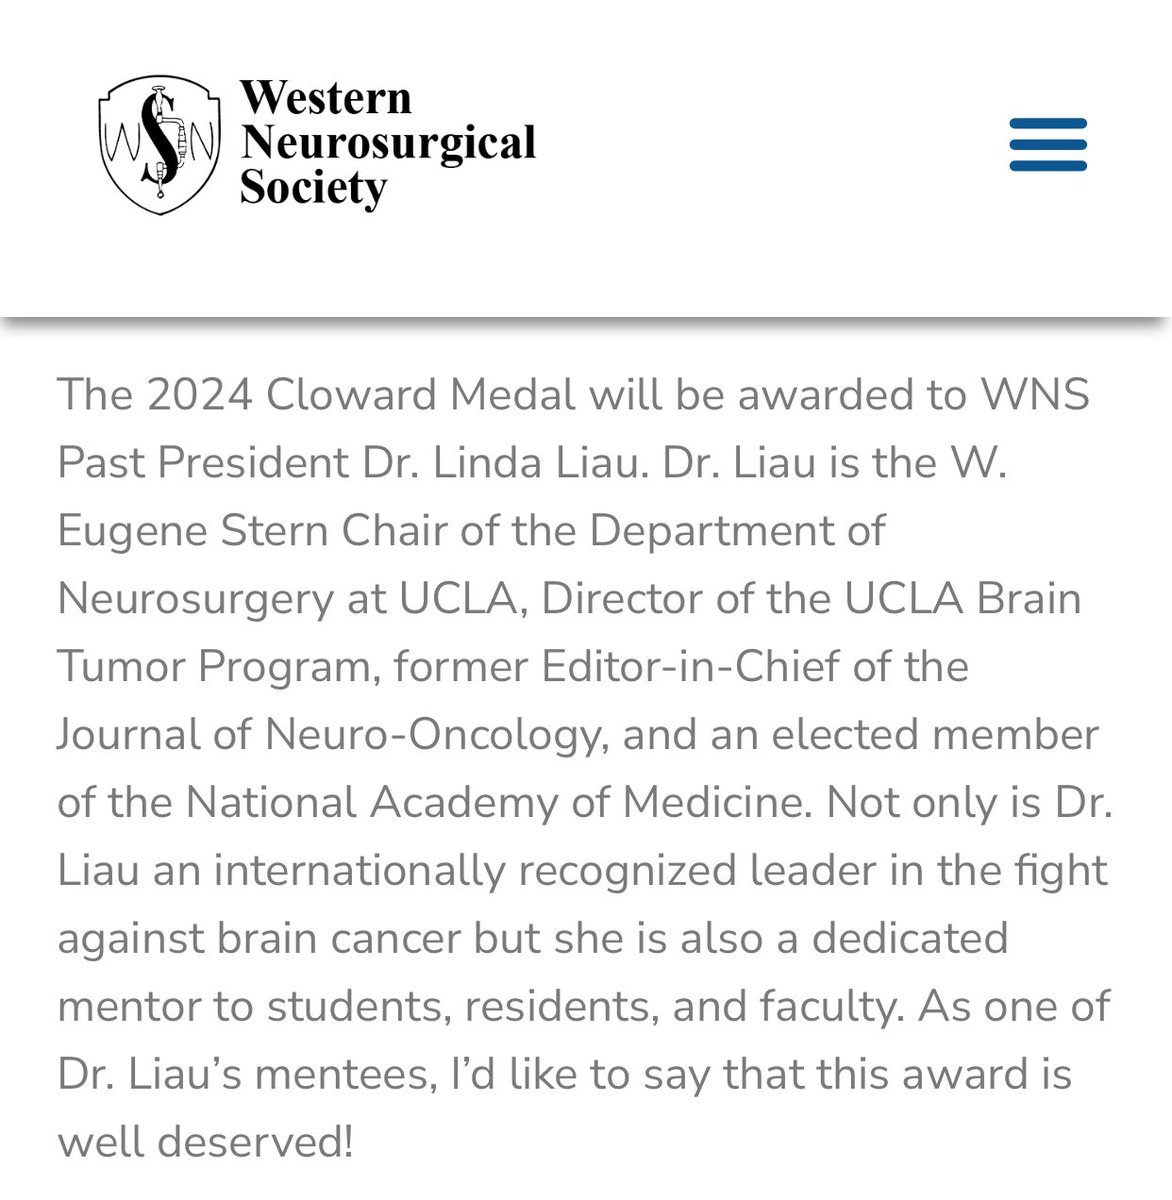 Congratulations to Dr. Linda Liau for being awarded the 2024 Cloward Medal by the Western Neurosurgical Society (WNS). Soon $NWBO #DCVax will be available for malignant glioma cancer patients in the U.K. Then, in the US, Canada, Germany & the rest of the EU: